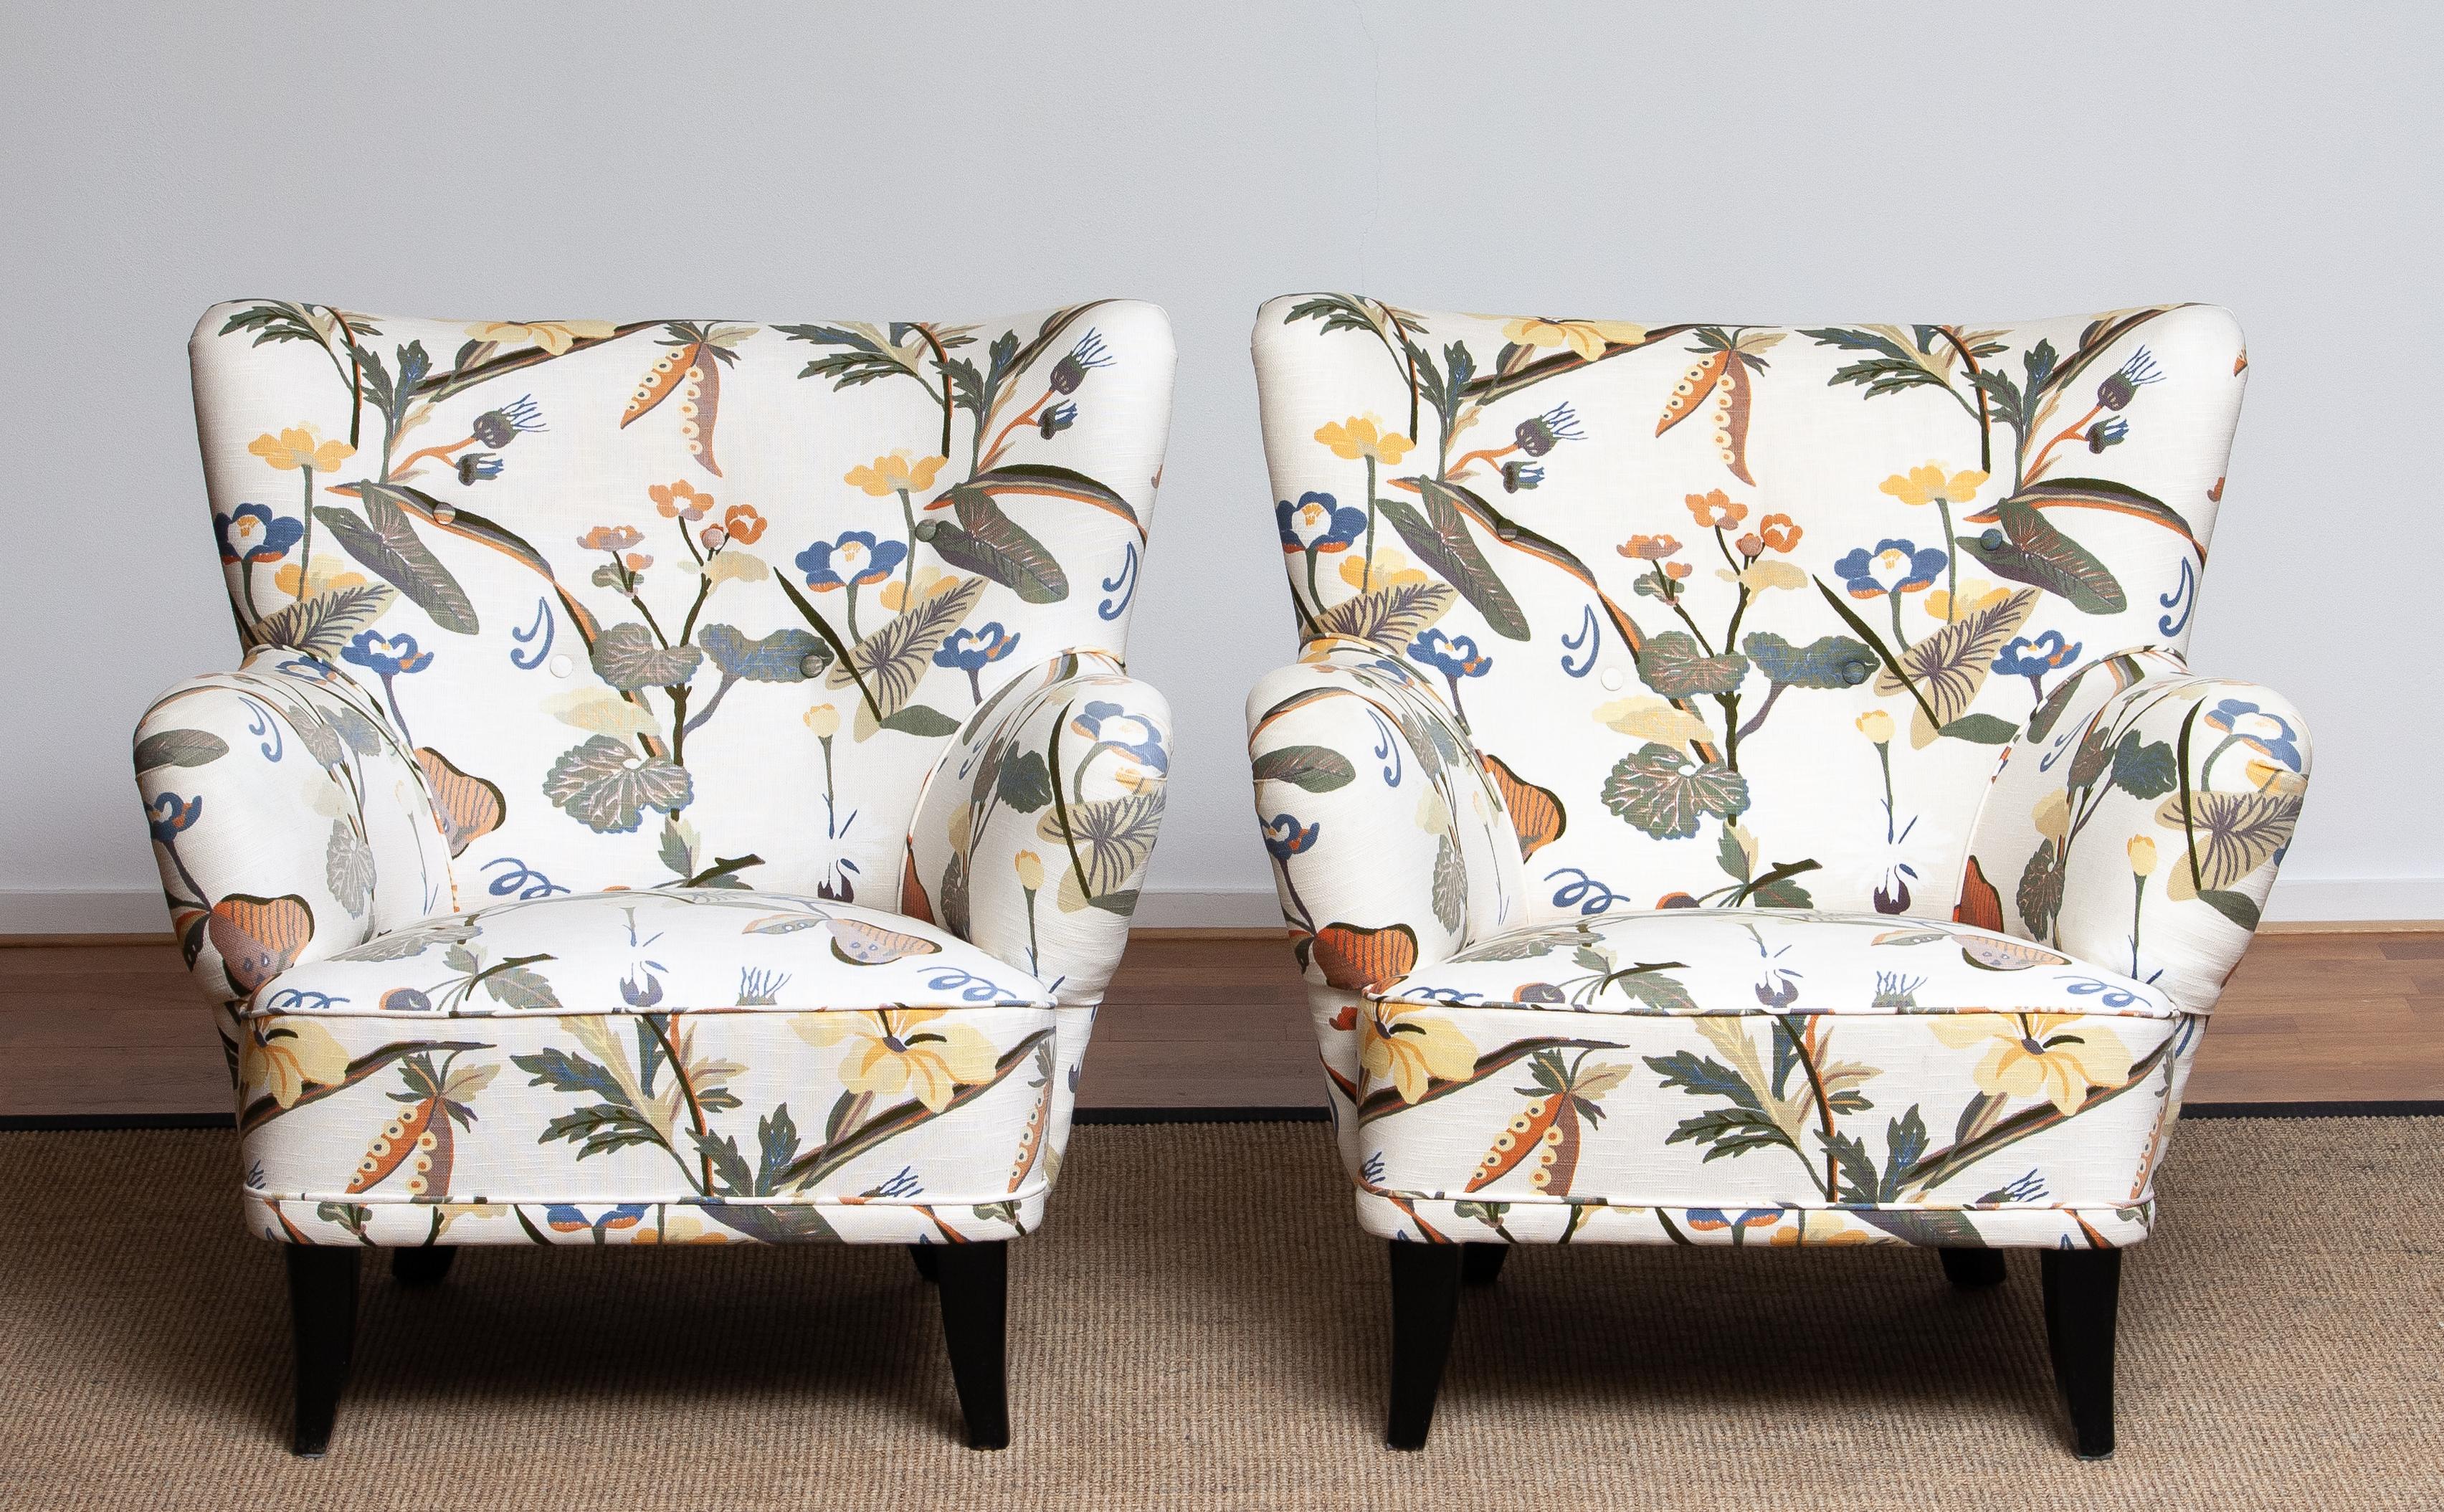 Set of two beautiful 1940s-1950s lounge / club chairs upholstered, in a later period, with the typical floral print fabric designed by Josef Frank.
The chairs are designed by Ilmari Lappalainen for Asko in Finland
The overall condition is good. One